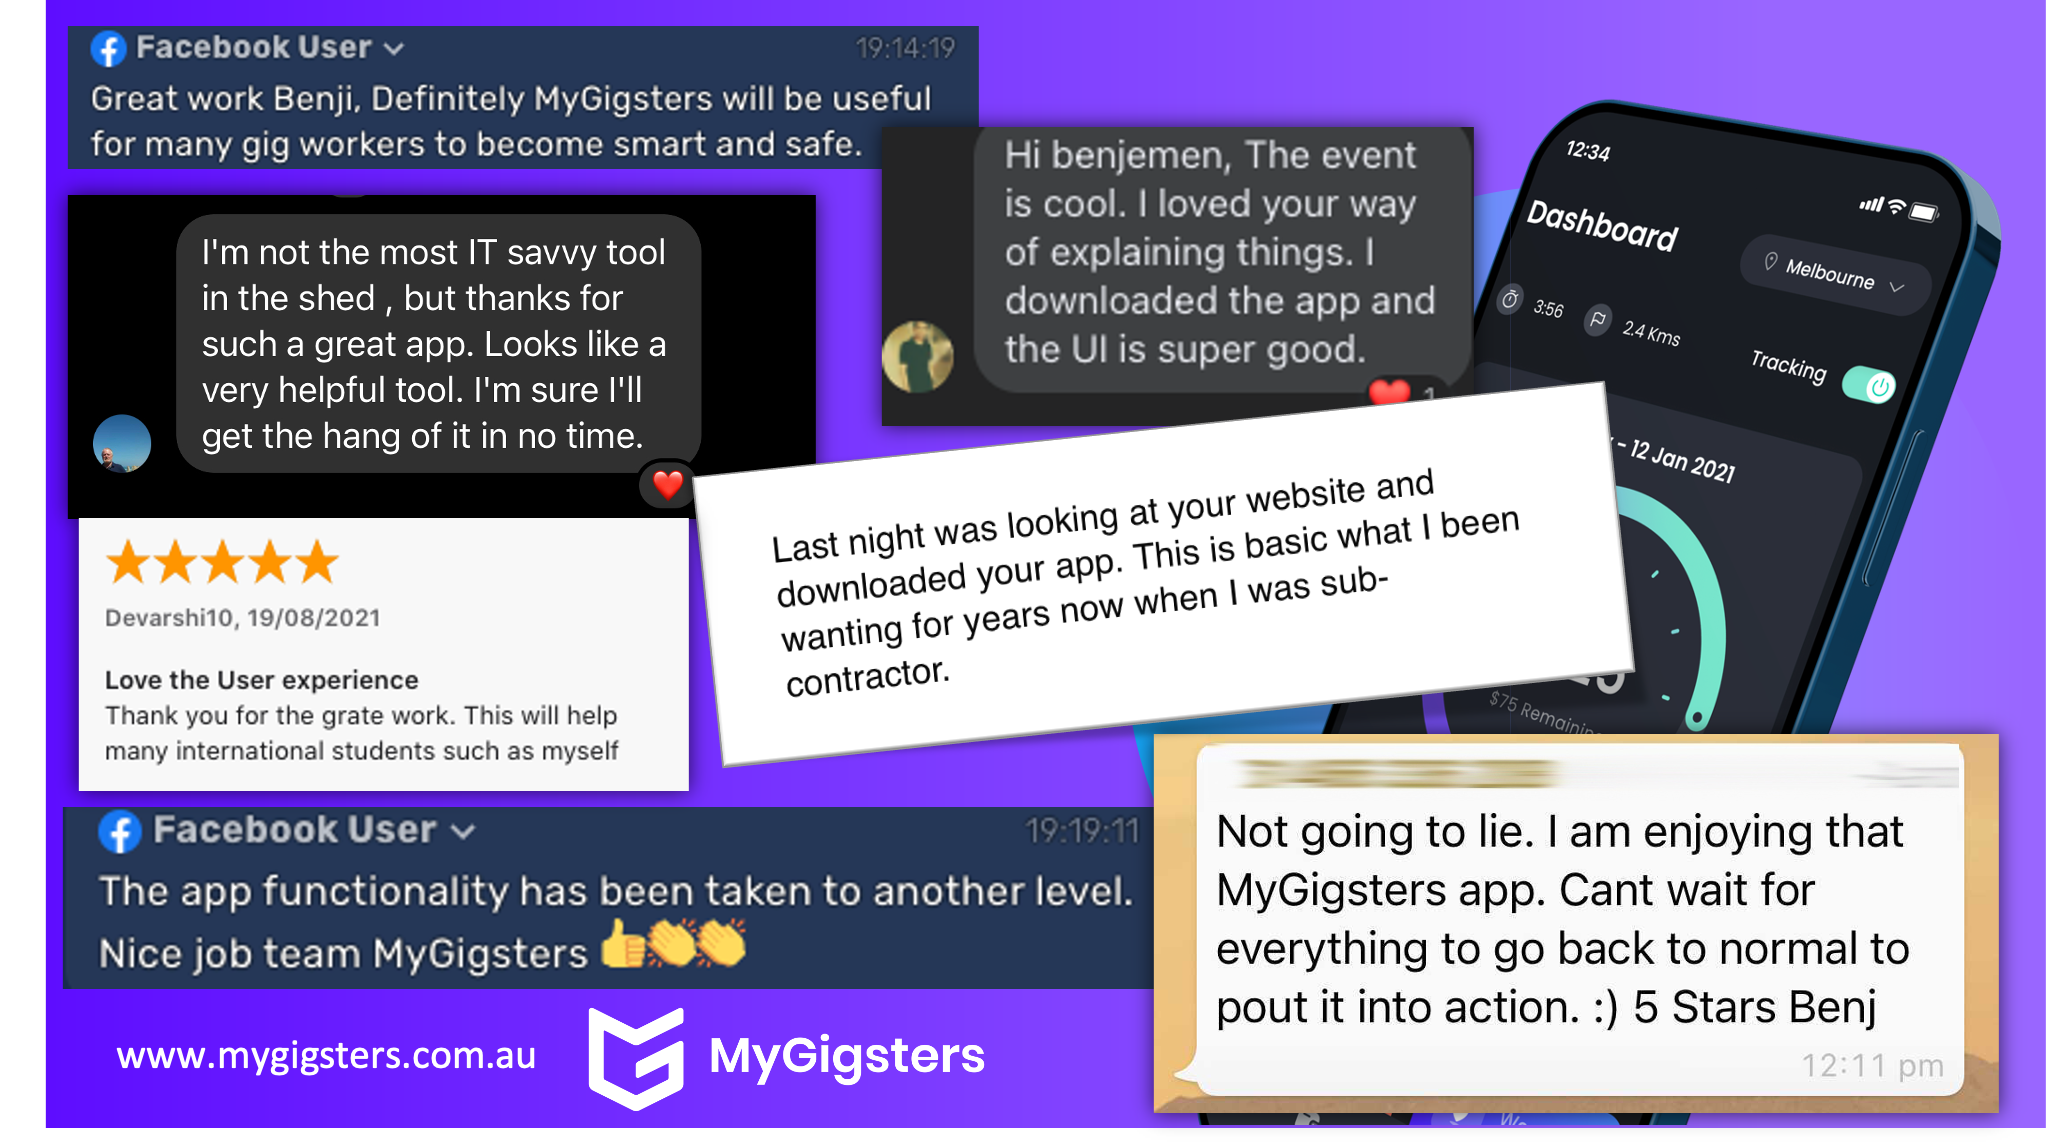 Feedback from our users of MyGigsters